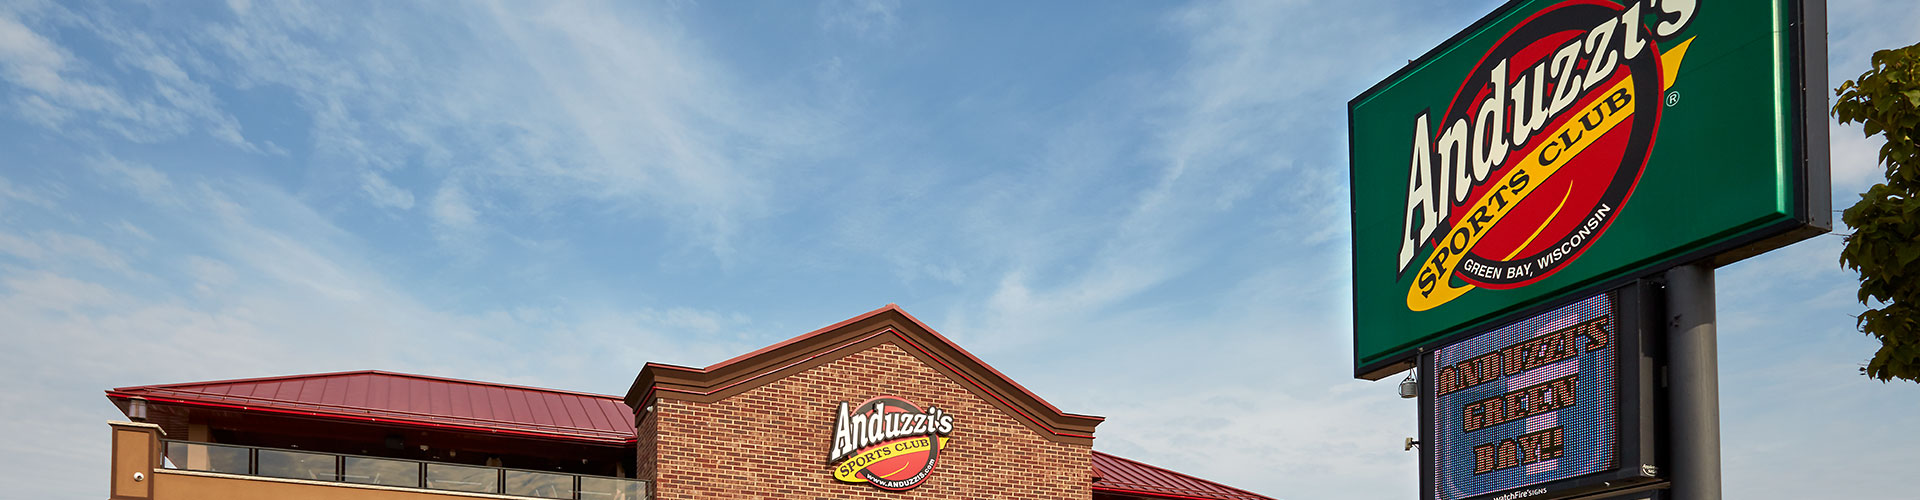 Anduzzi's sign with building in the background